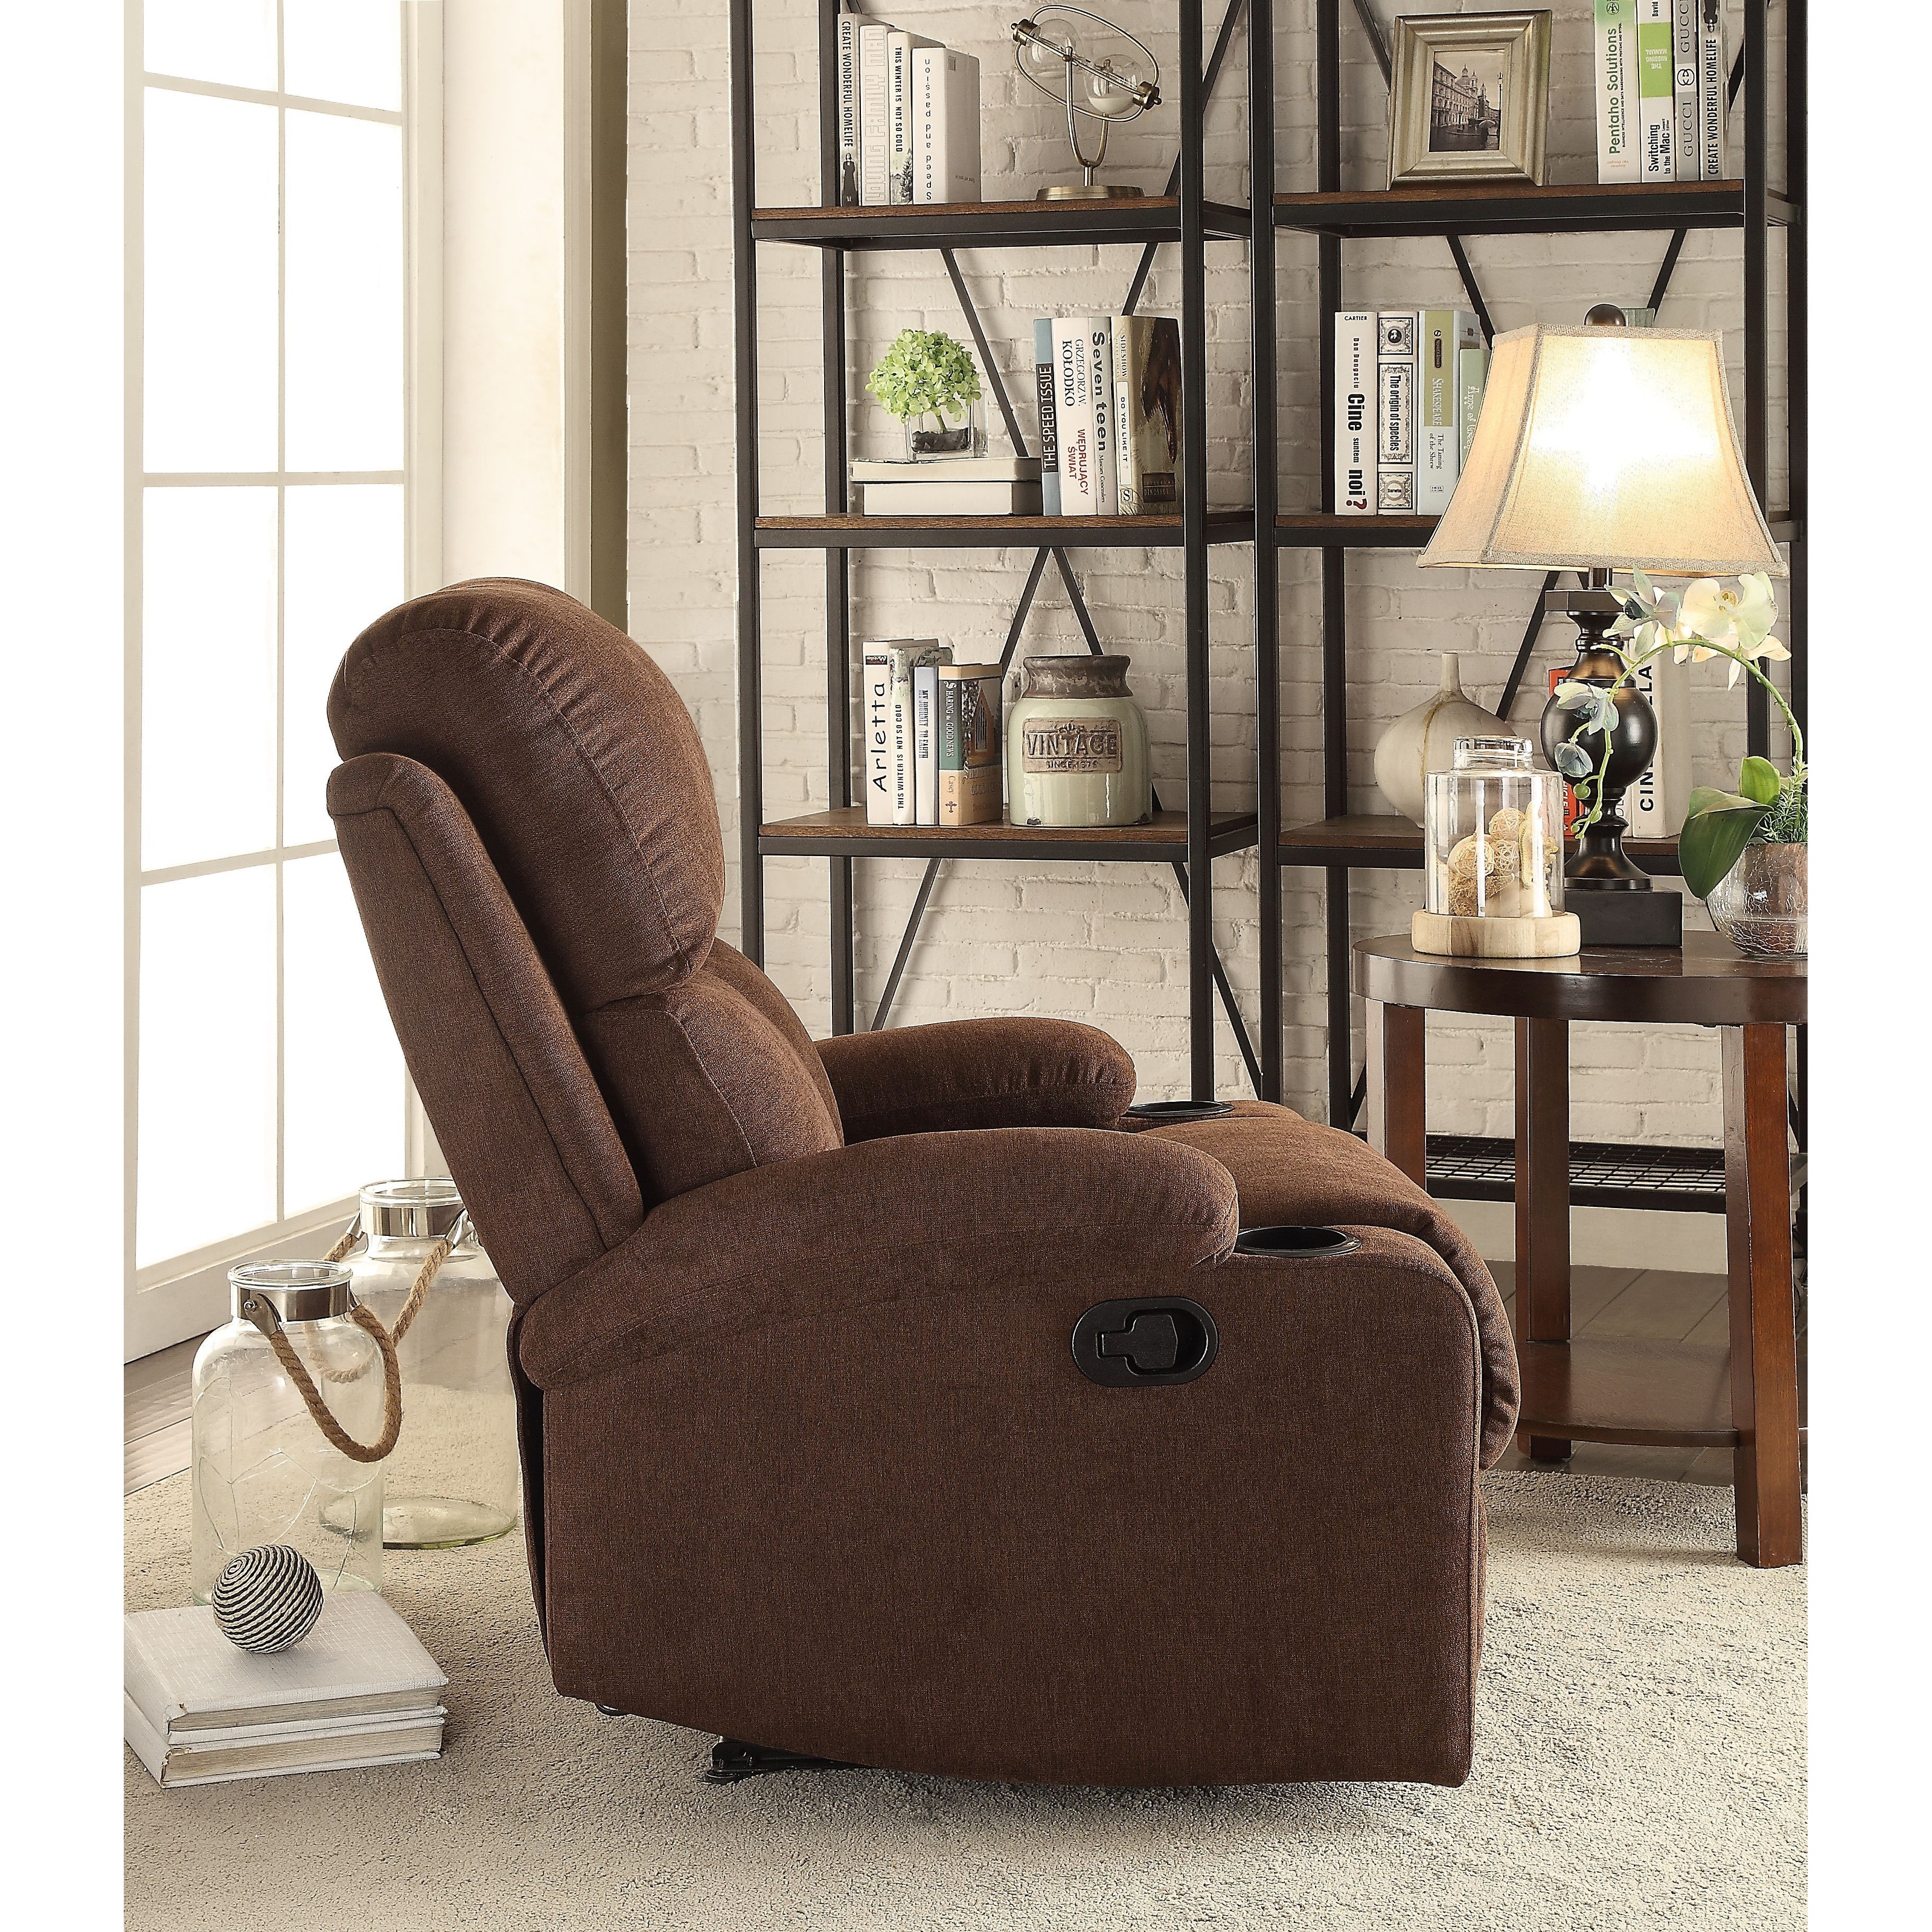 https://ak1.ostkcdn.com/images/products/is/images/direct/76d865bc0b85110b63d6e94ca99cb0b9869965b6/Chocolate-Vintage-Motion-Recliner-with-Tight-Back-%26-Seat-Cushions-and-Pillow-Top-Arm-%26-Cup-Holder.jpg